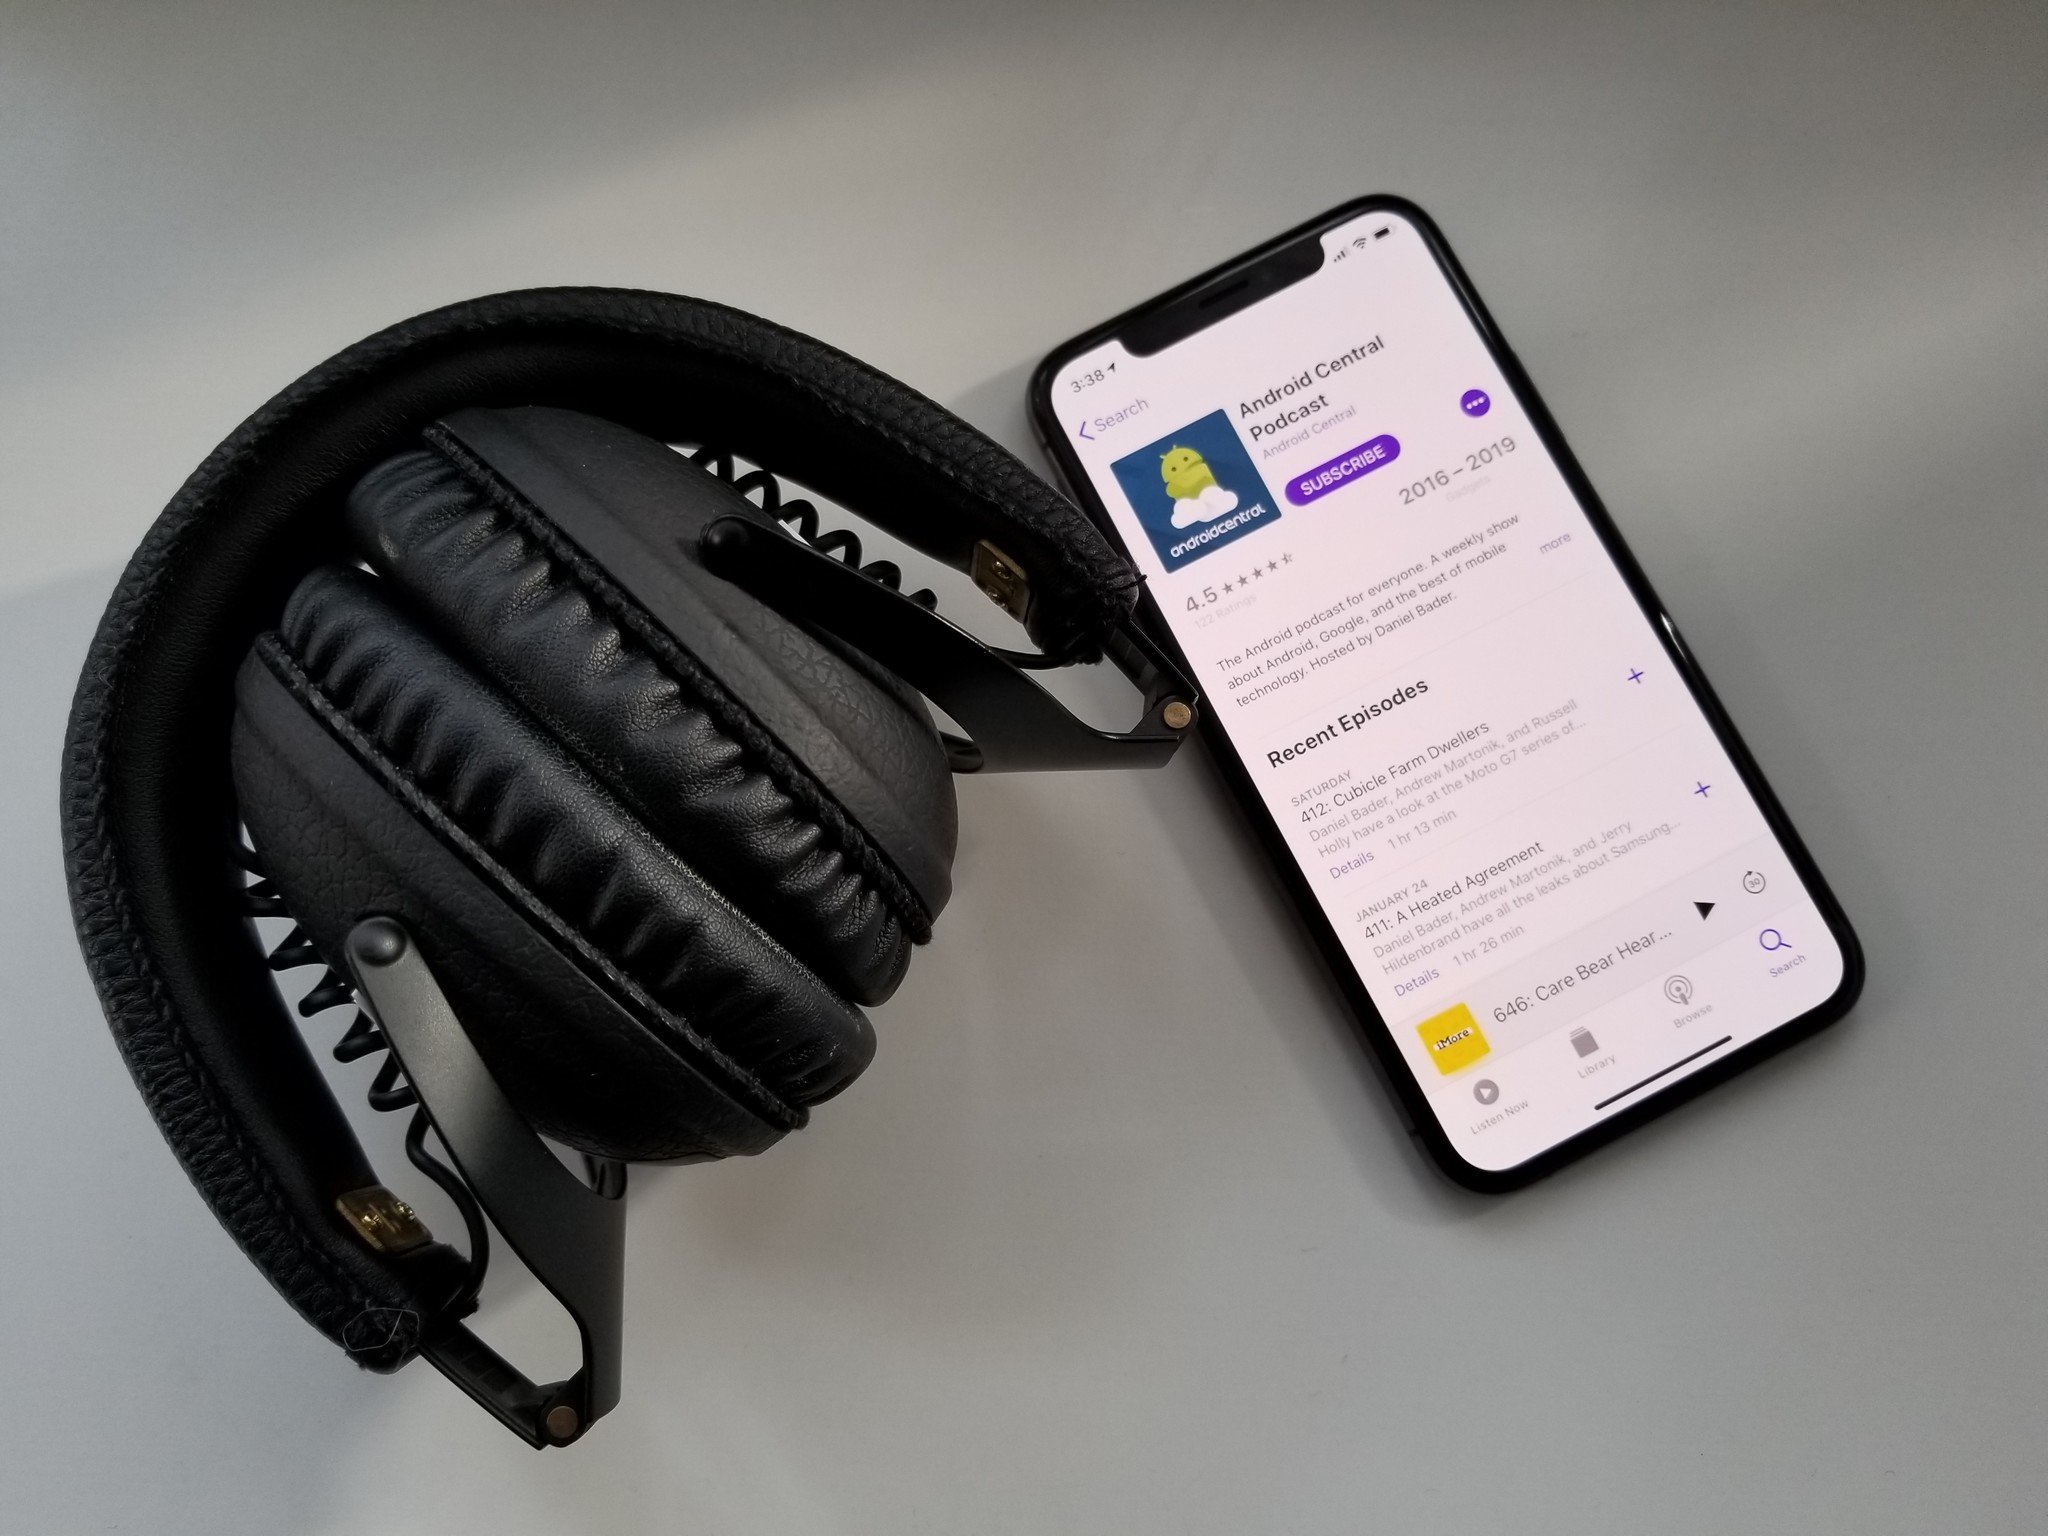 An iPhone XS with Android Central in Podcasts app displayed on the screen next to a pair of headphones